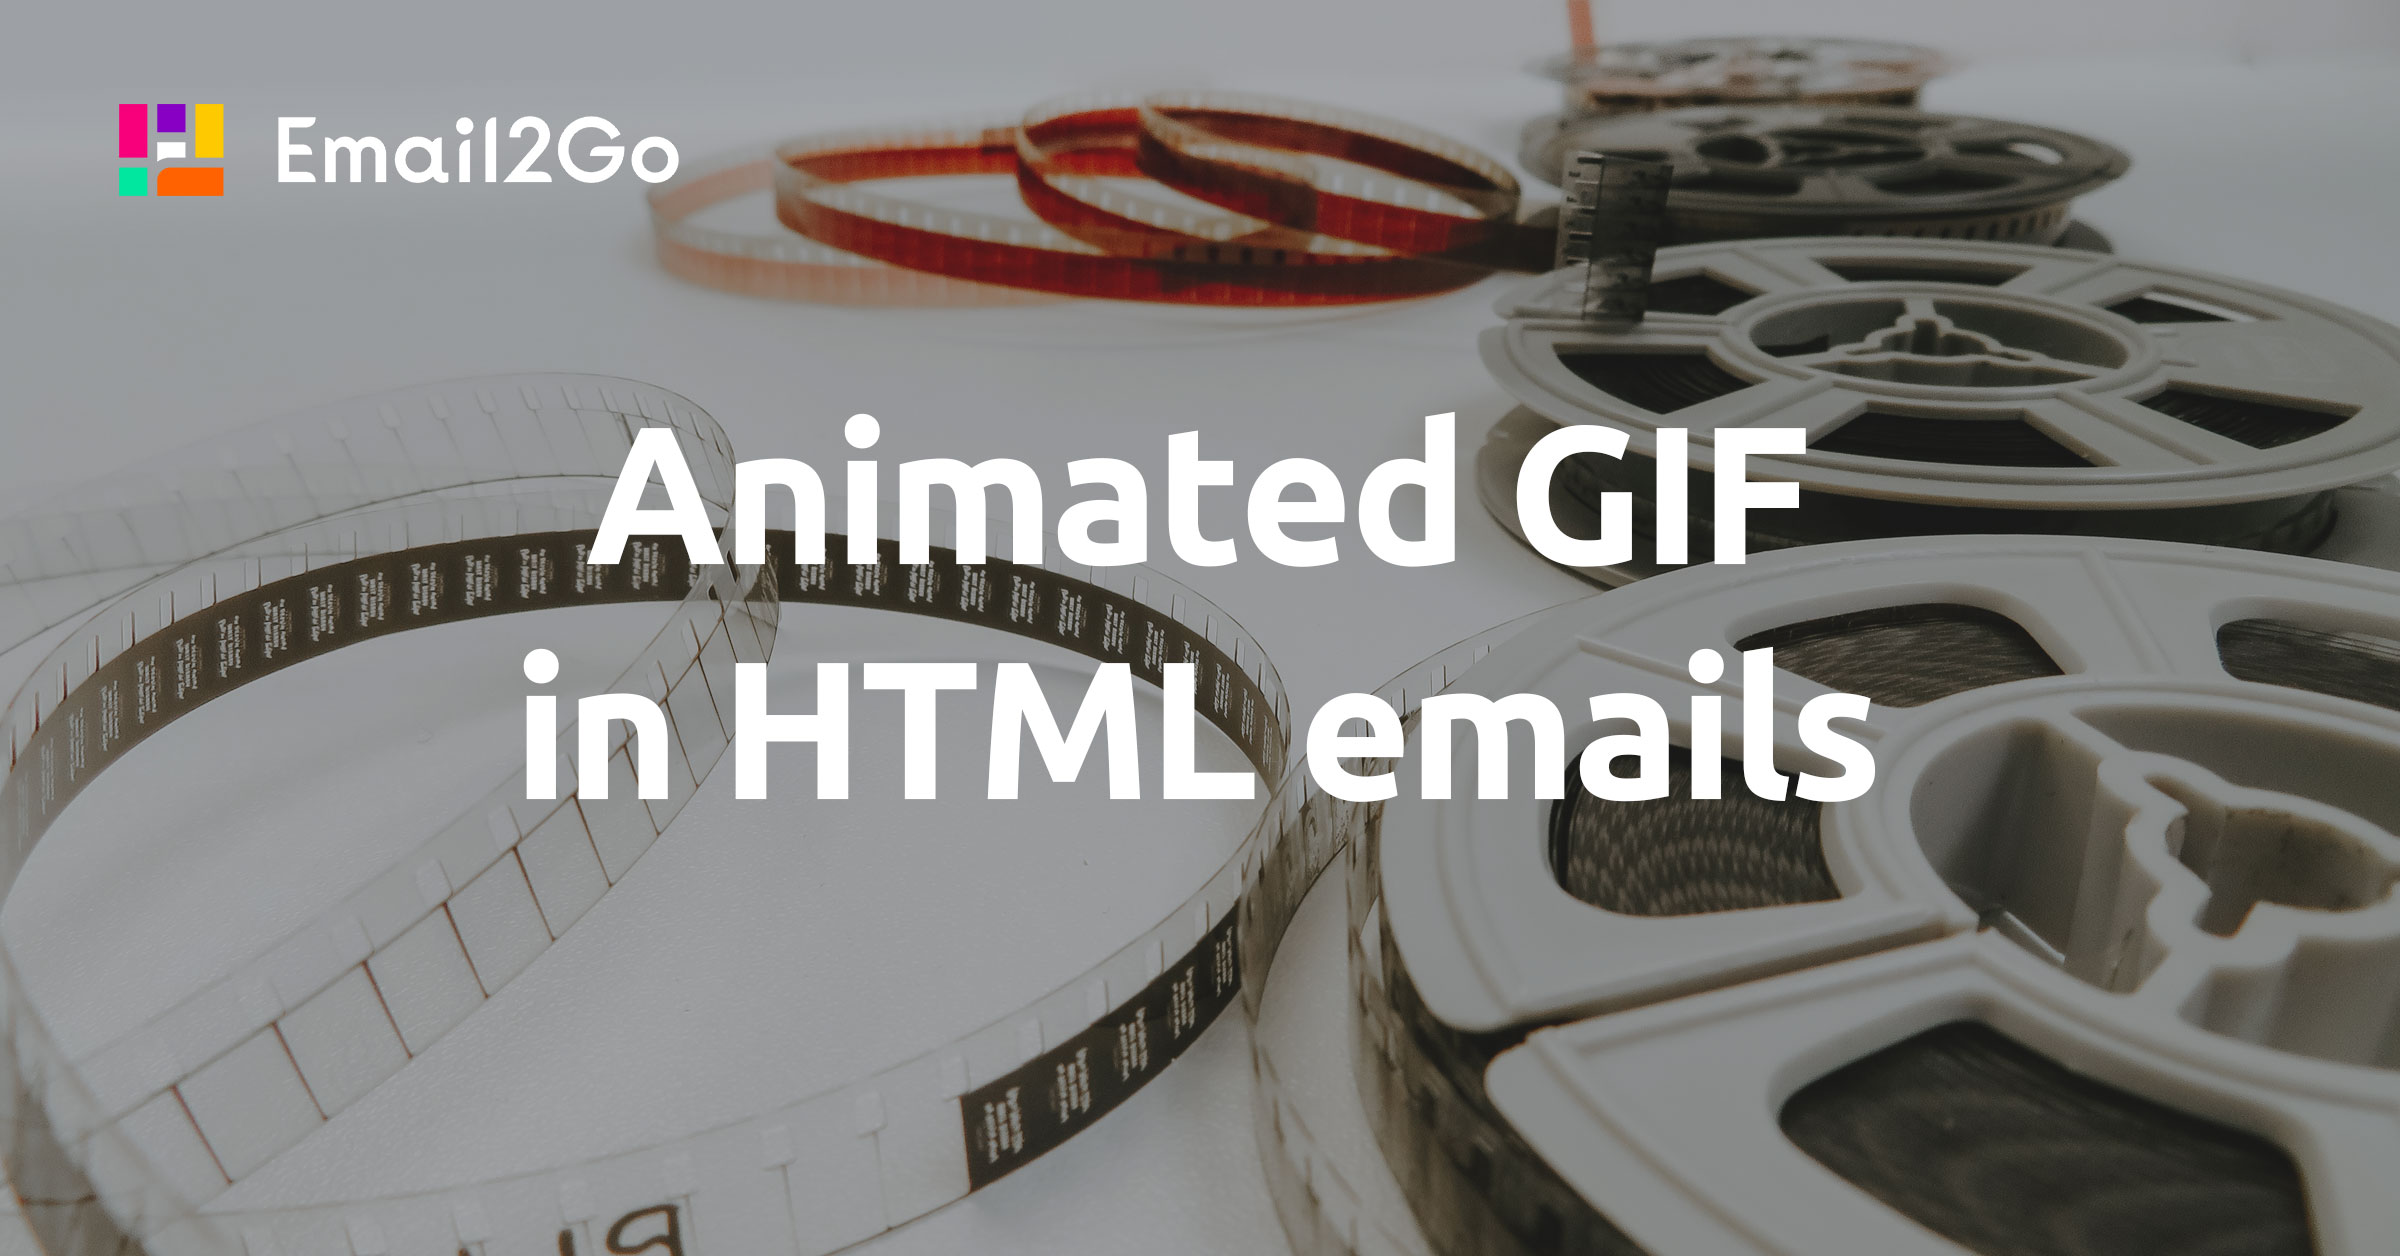 Animated GIF in HTML emails